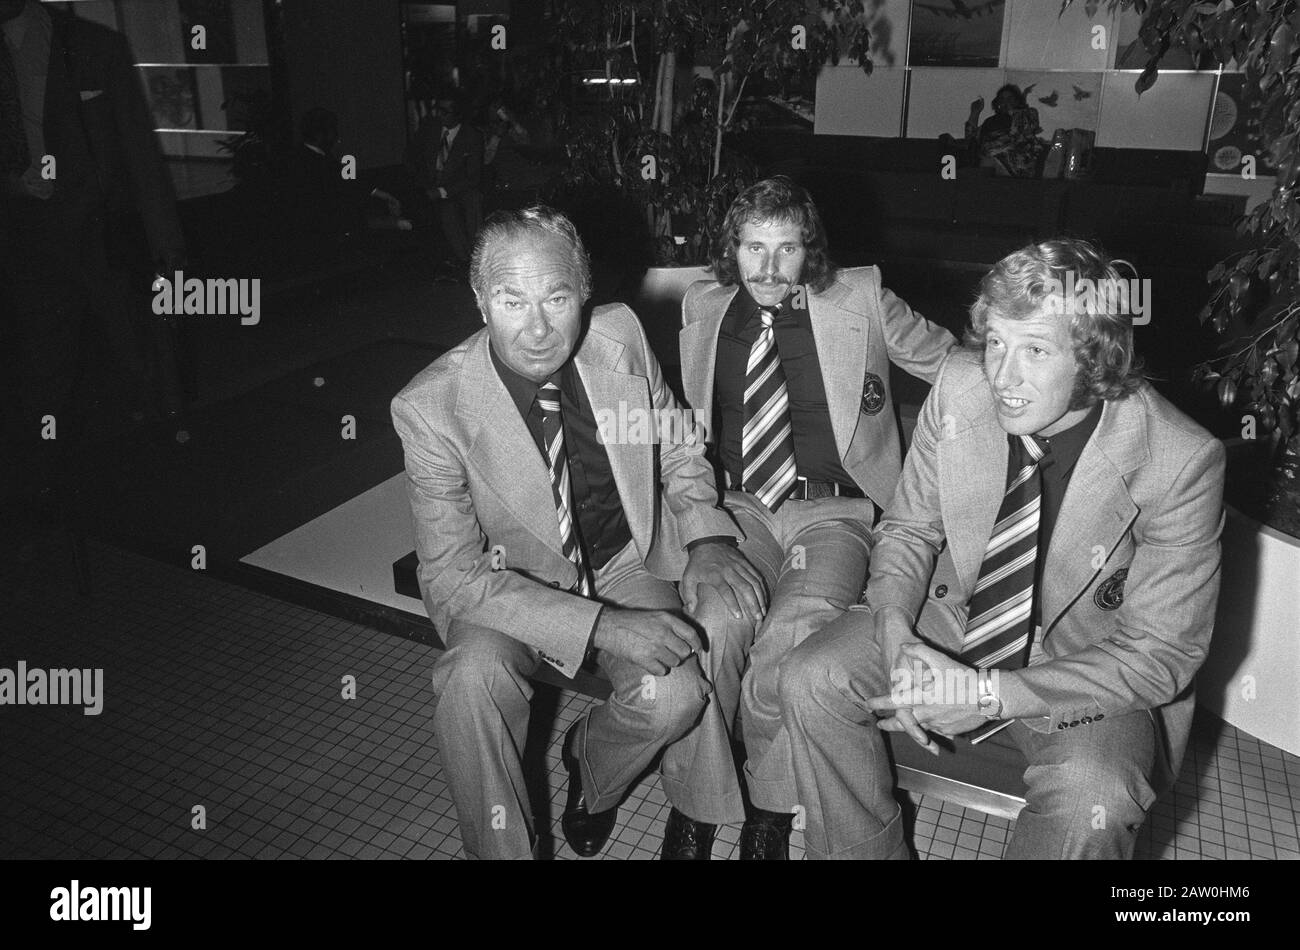 Dutch soccer team leaves for Oslo, v.l.n.r. Fadrhonc, Drost and Jeuring Date: September 10, 1973 Keywords: football, teams, sports Person Name: Drost, Fadrhonc, Franti ek Stock Photo